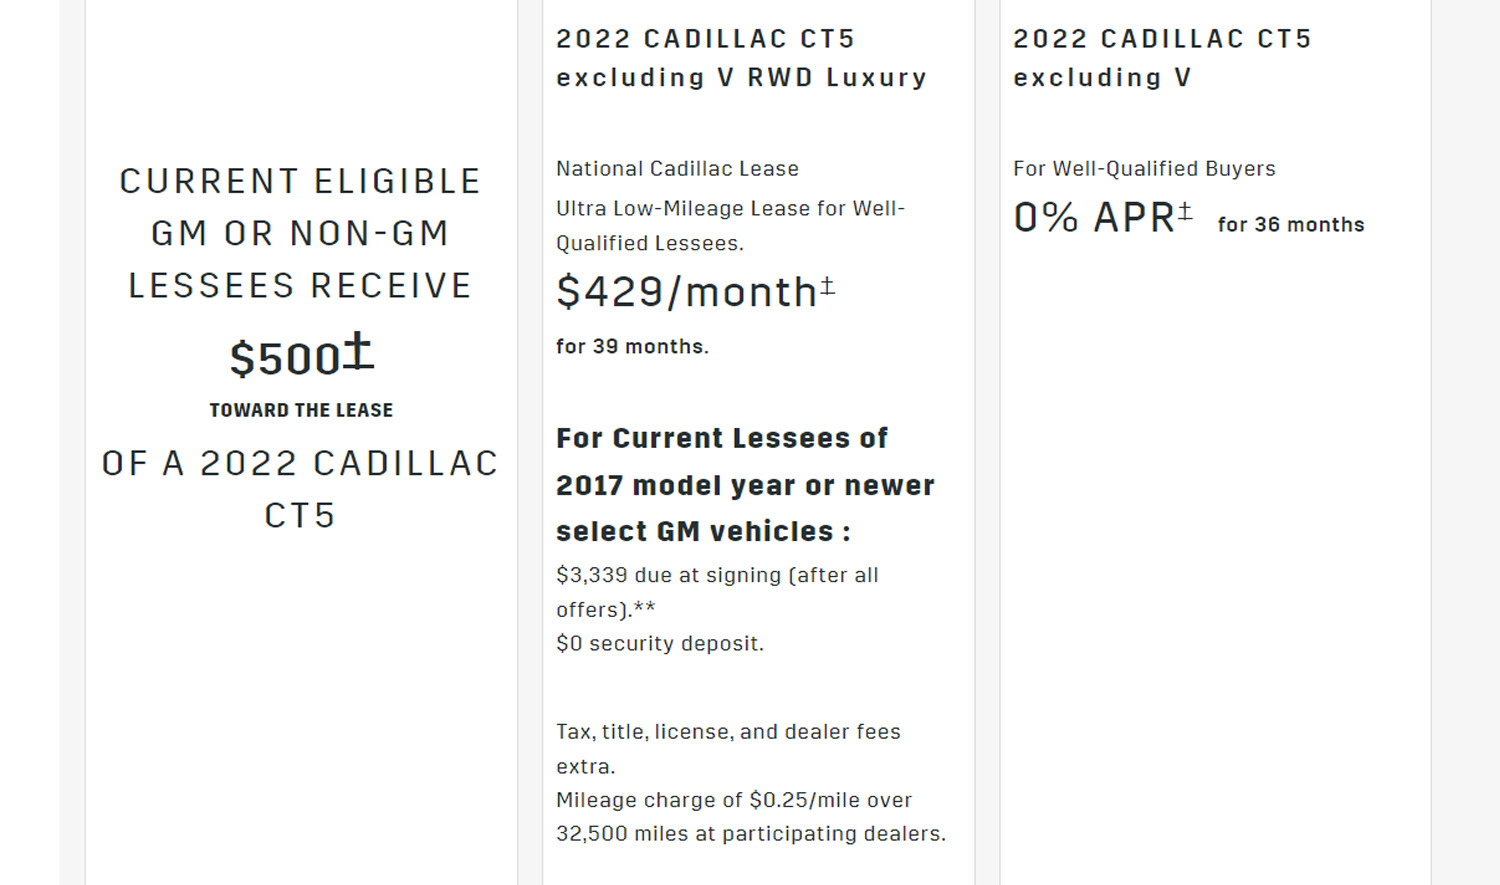 cadillac-ct5-discount-offers-500-off-or-0-percent-apr-in-april-2022